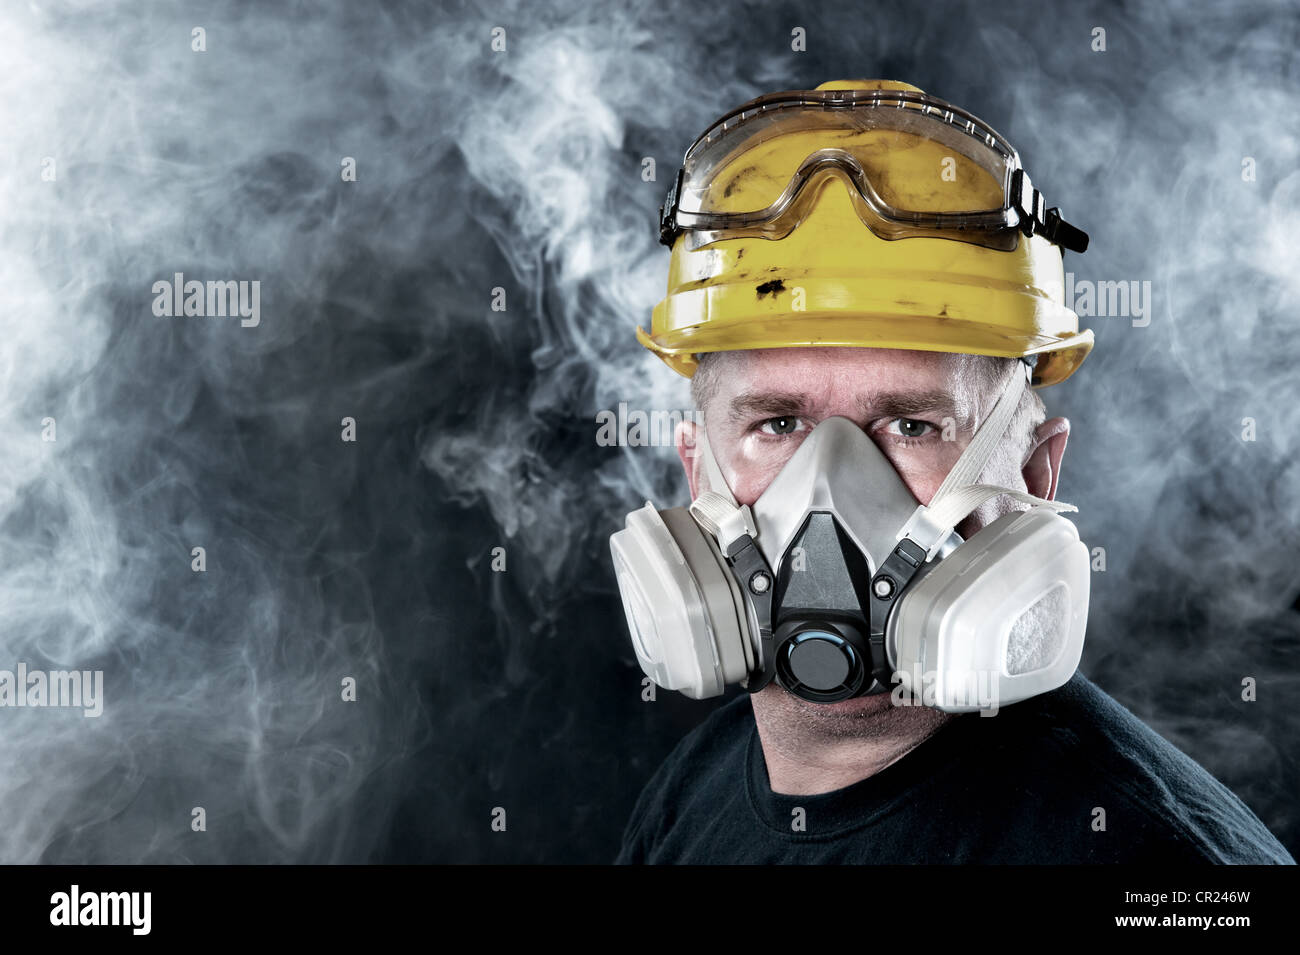 A rescue worker wears a respirator in a smoke, toxic atmosphere. Image show the importance of protection readiness and safety. Stock Photo